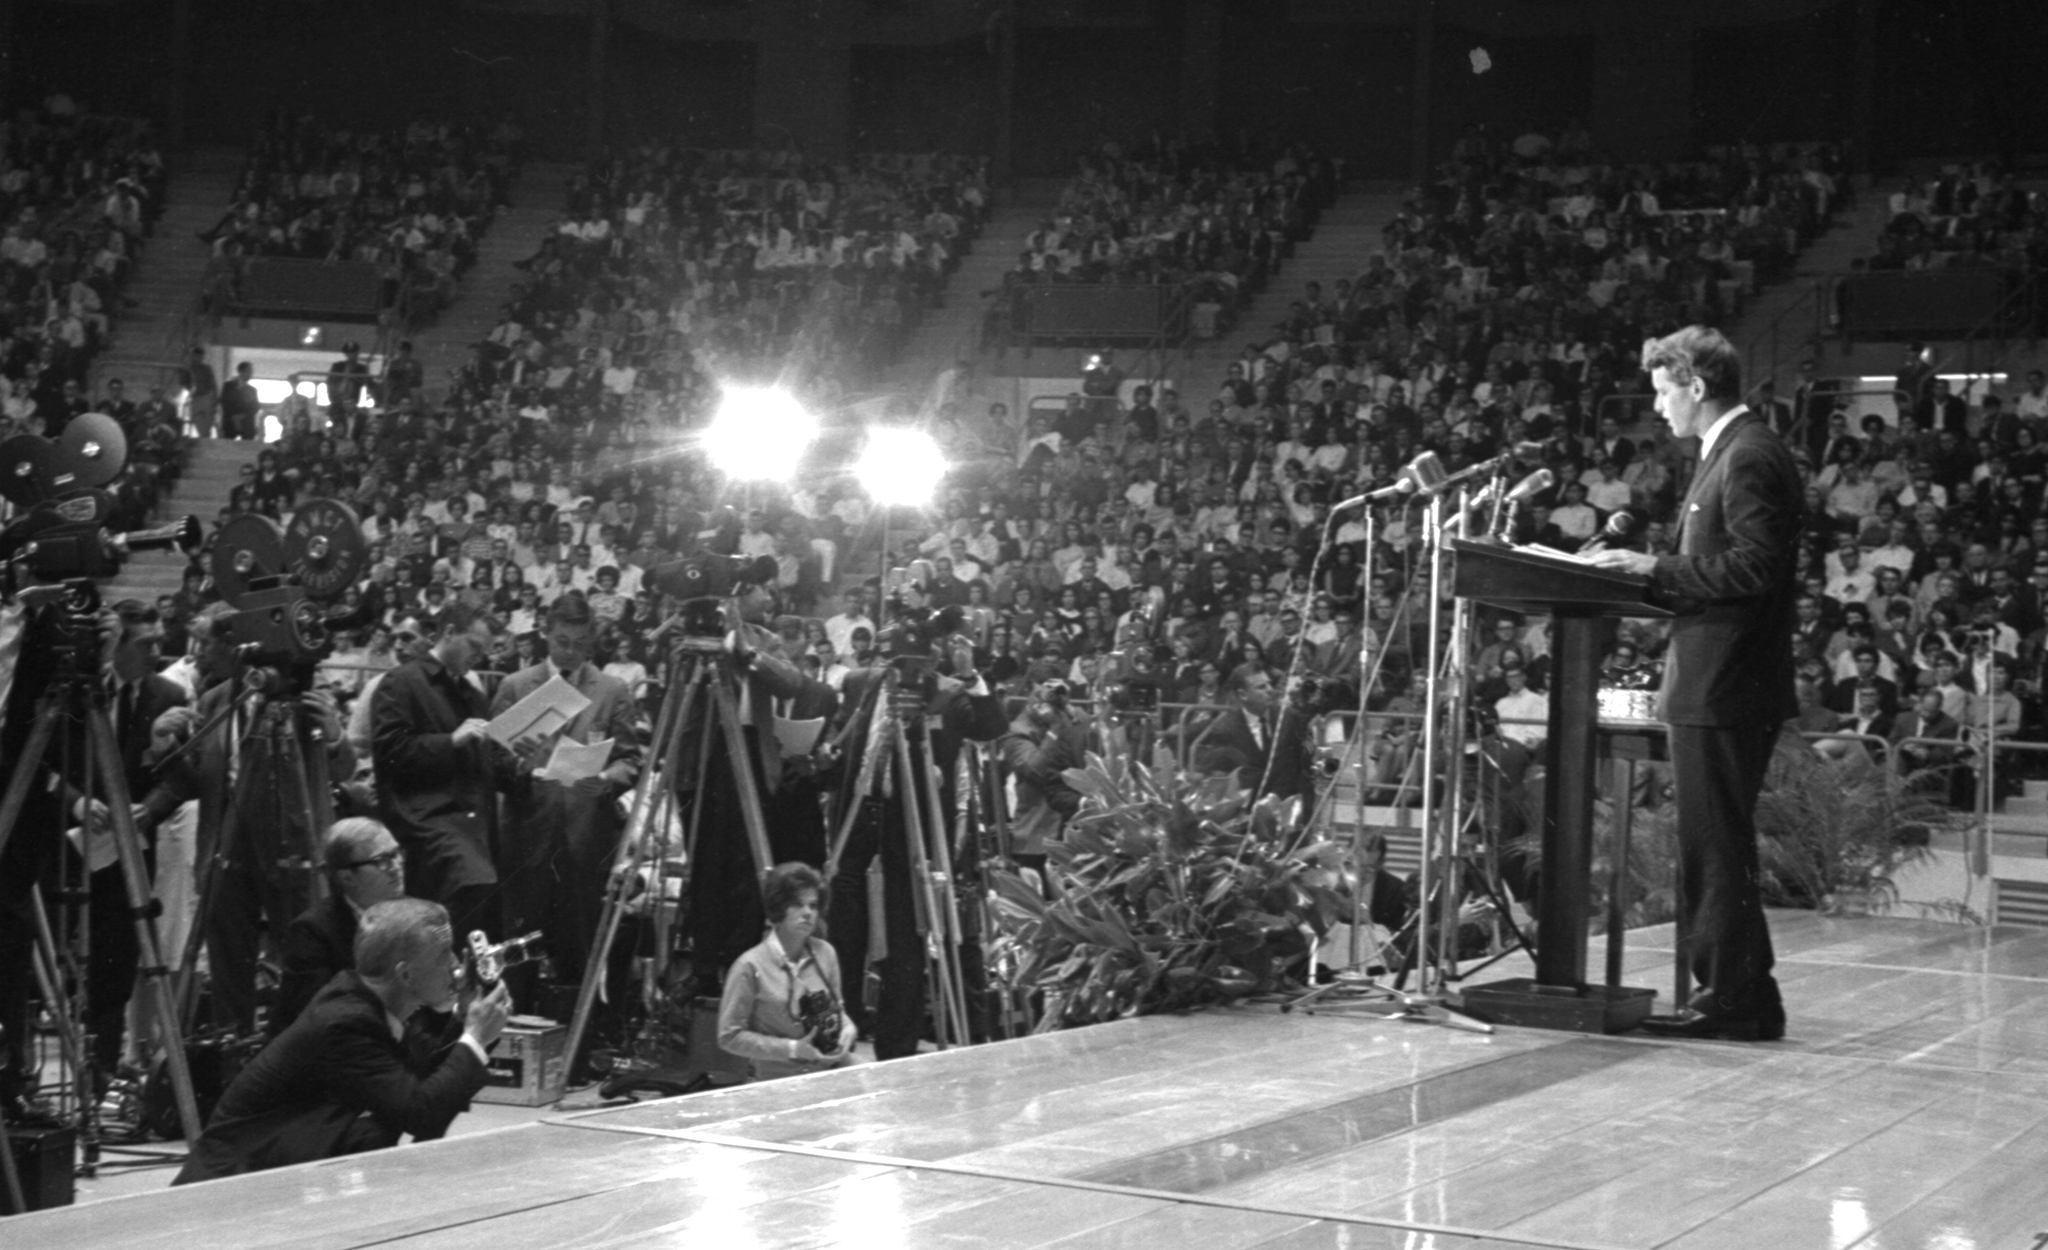 Black and white photo of Bobby Kennedy standing at podium addressing crowd in Tad Smith Auditorium.